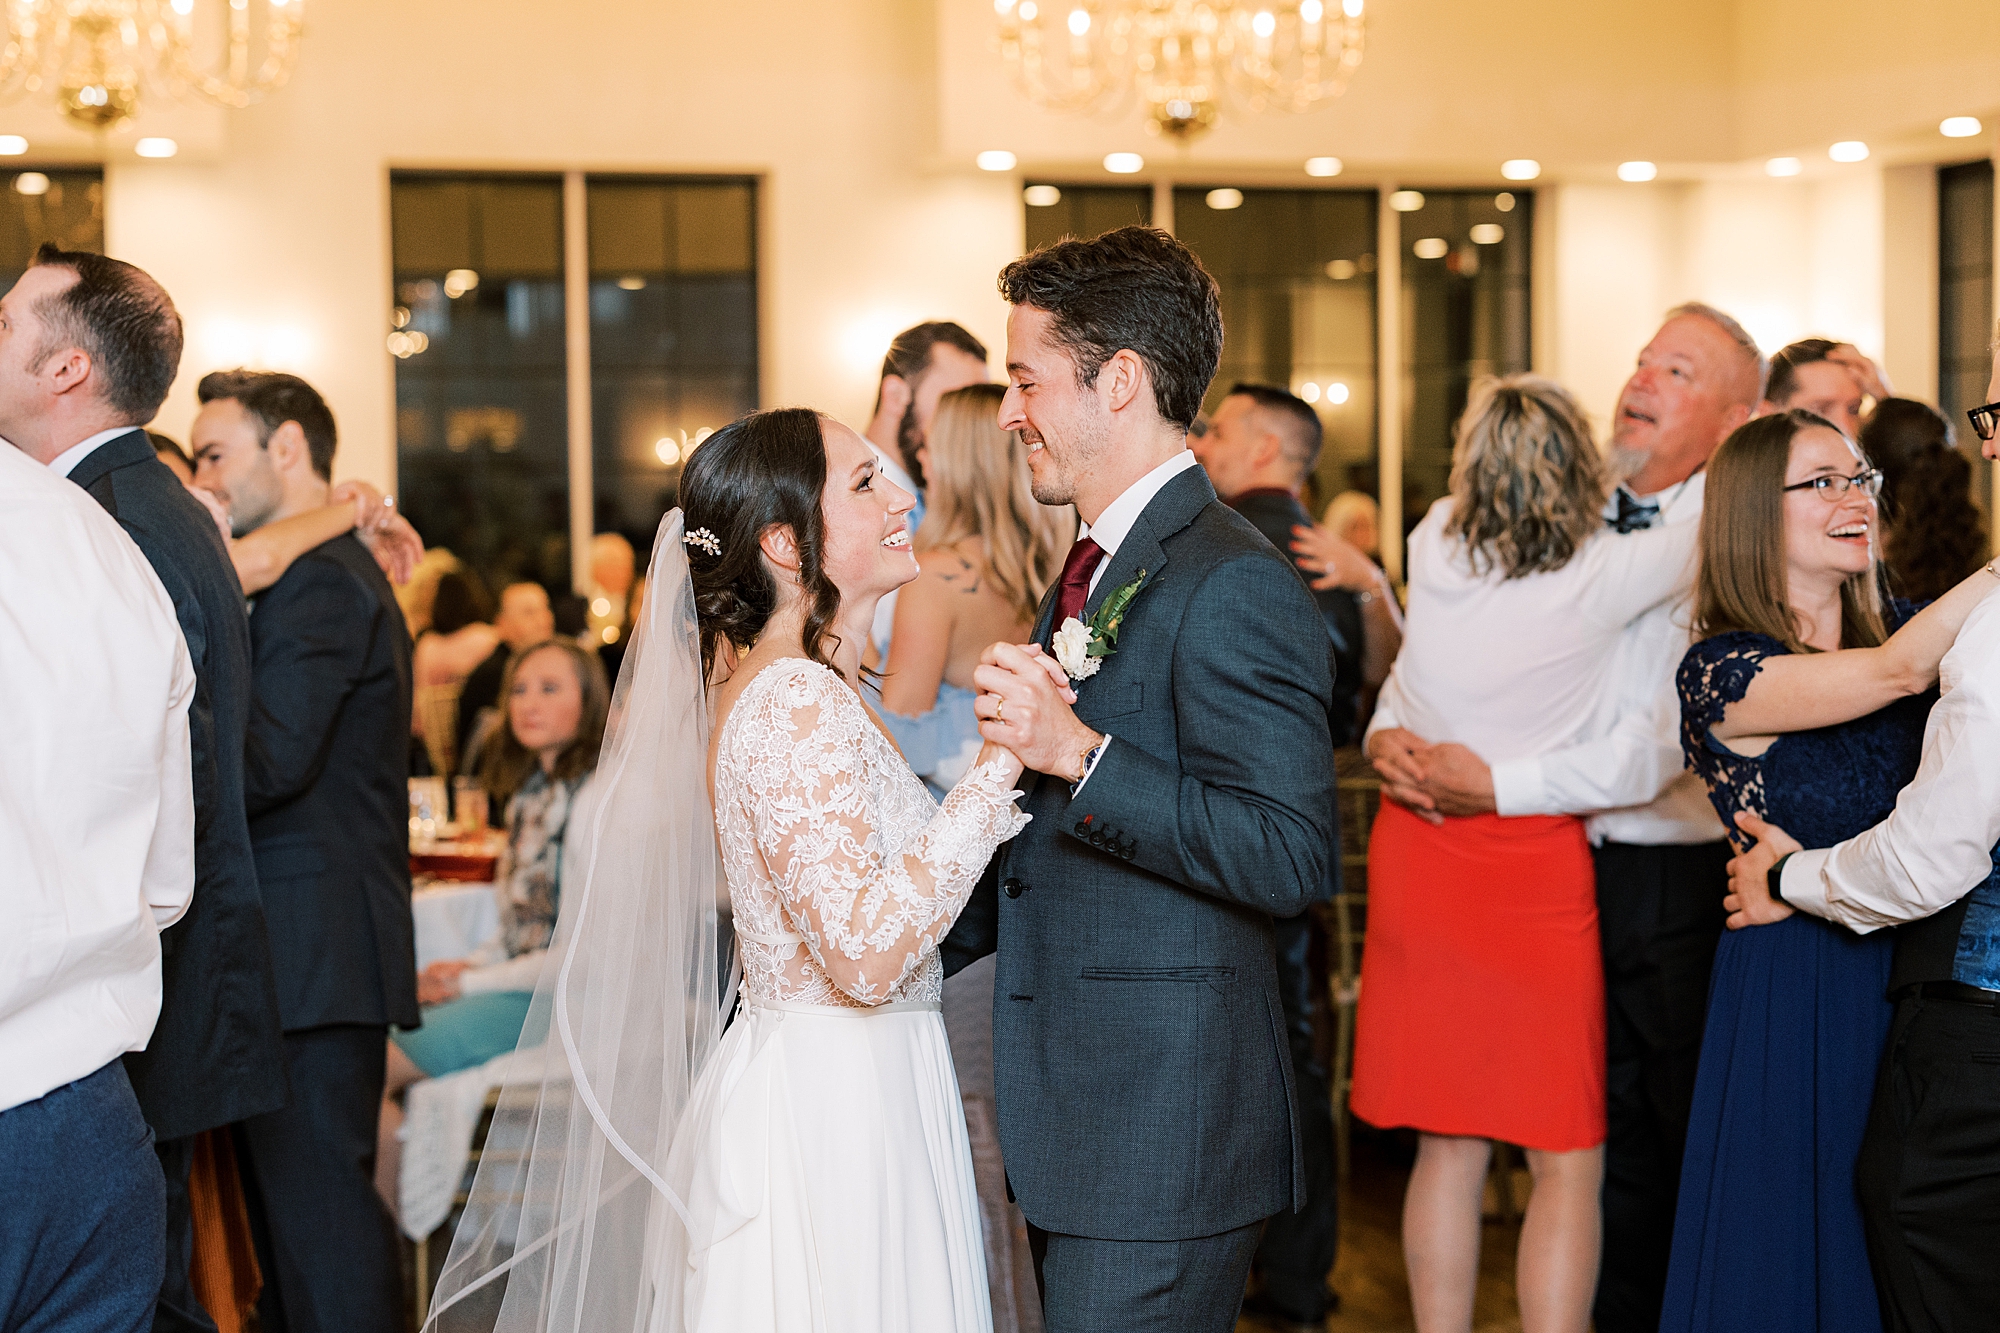 newlyweds dance with wedding guests around them at Huntingdon Valley Country Club